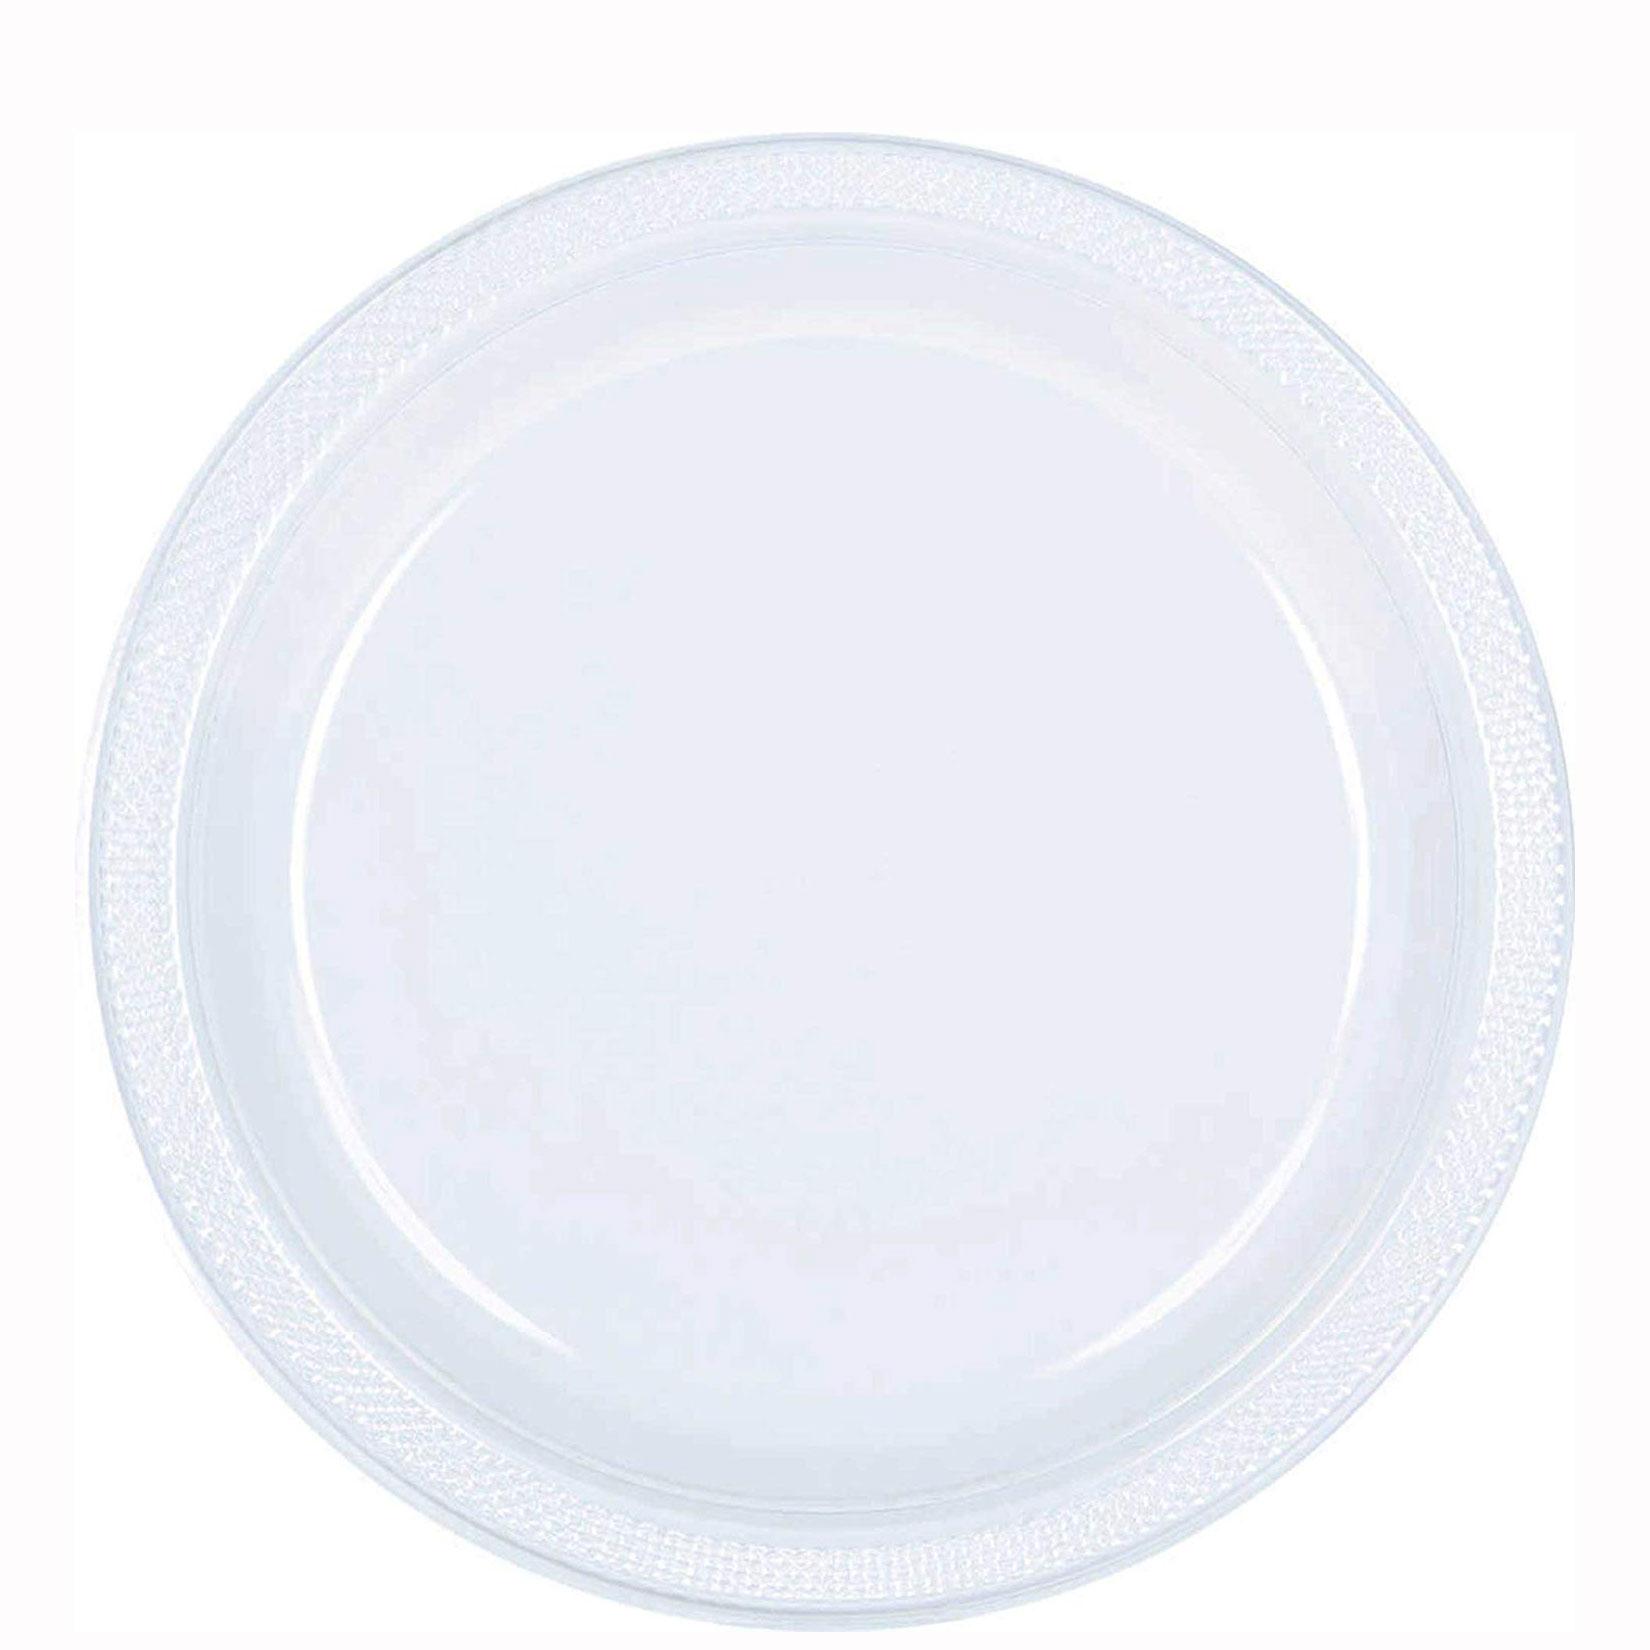 Clear Plastic Round Party Plates 9in 20pcs Solid Tableware - Party Centre